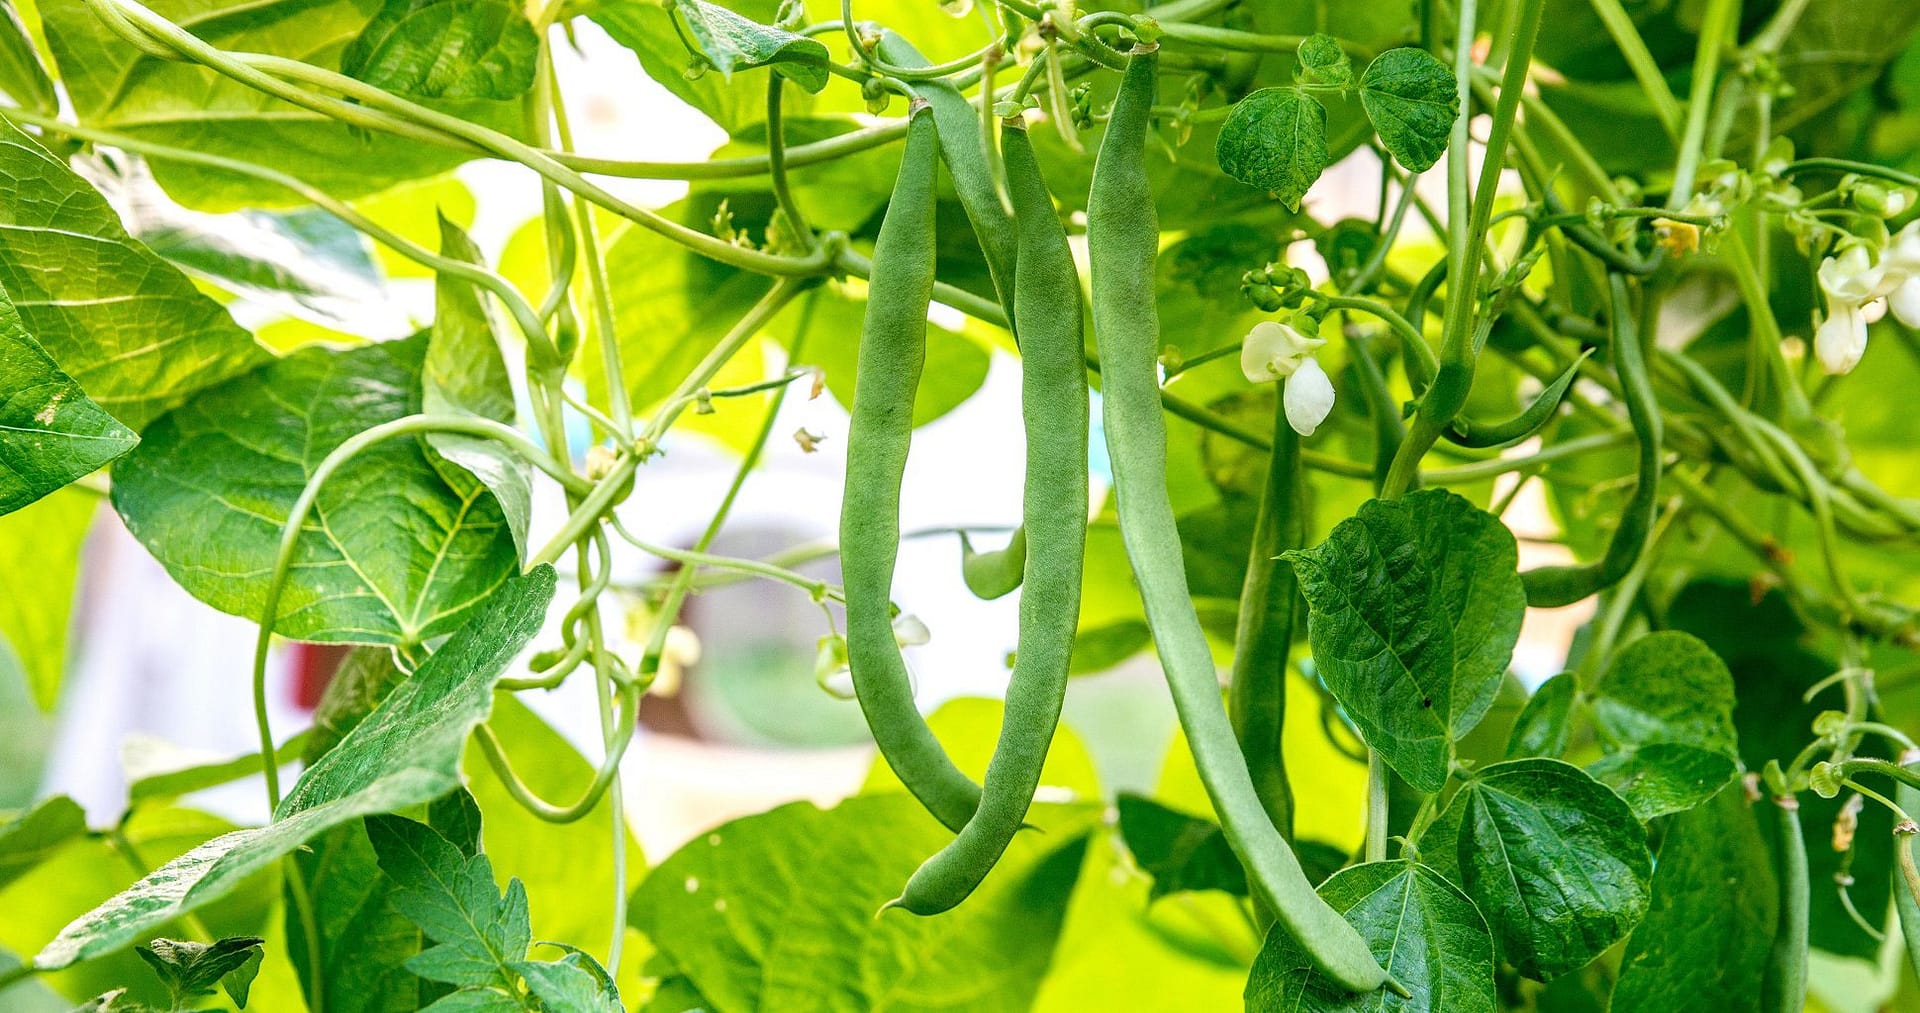 How To Grow Green Beans?